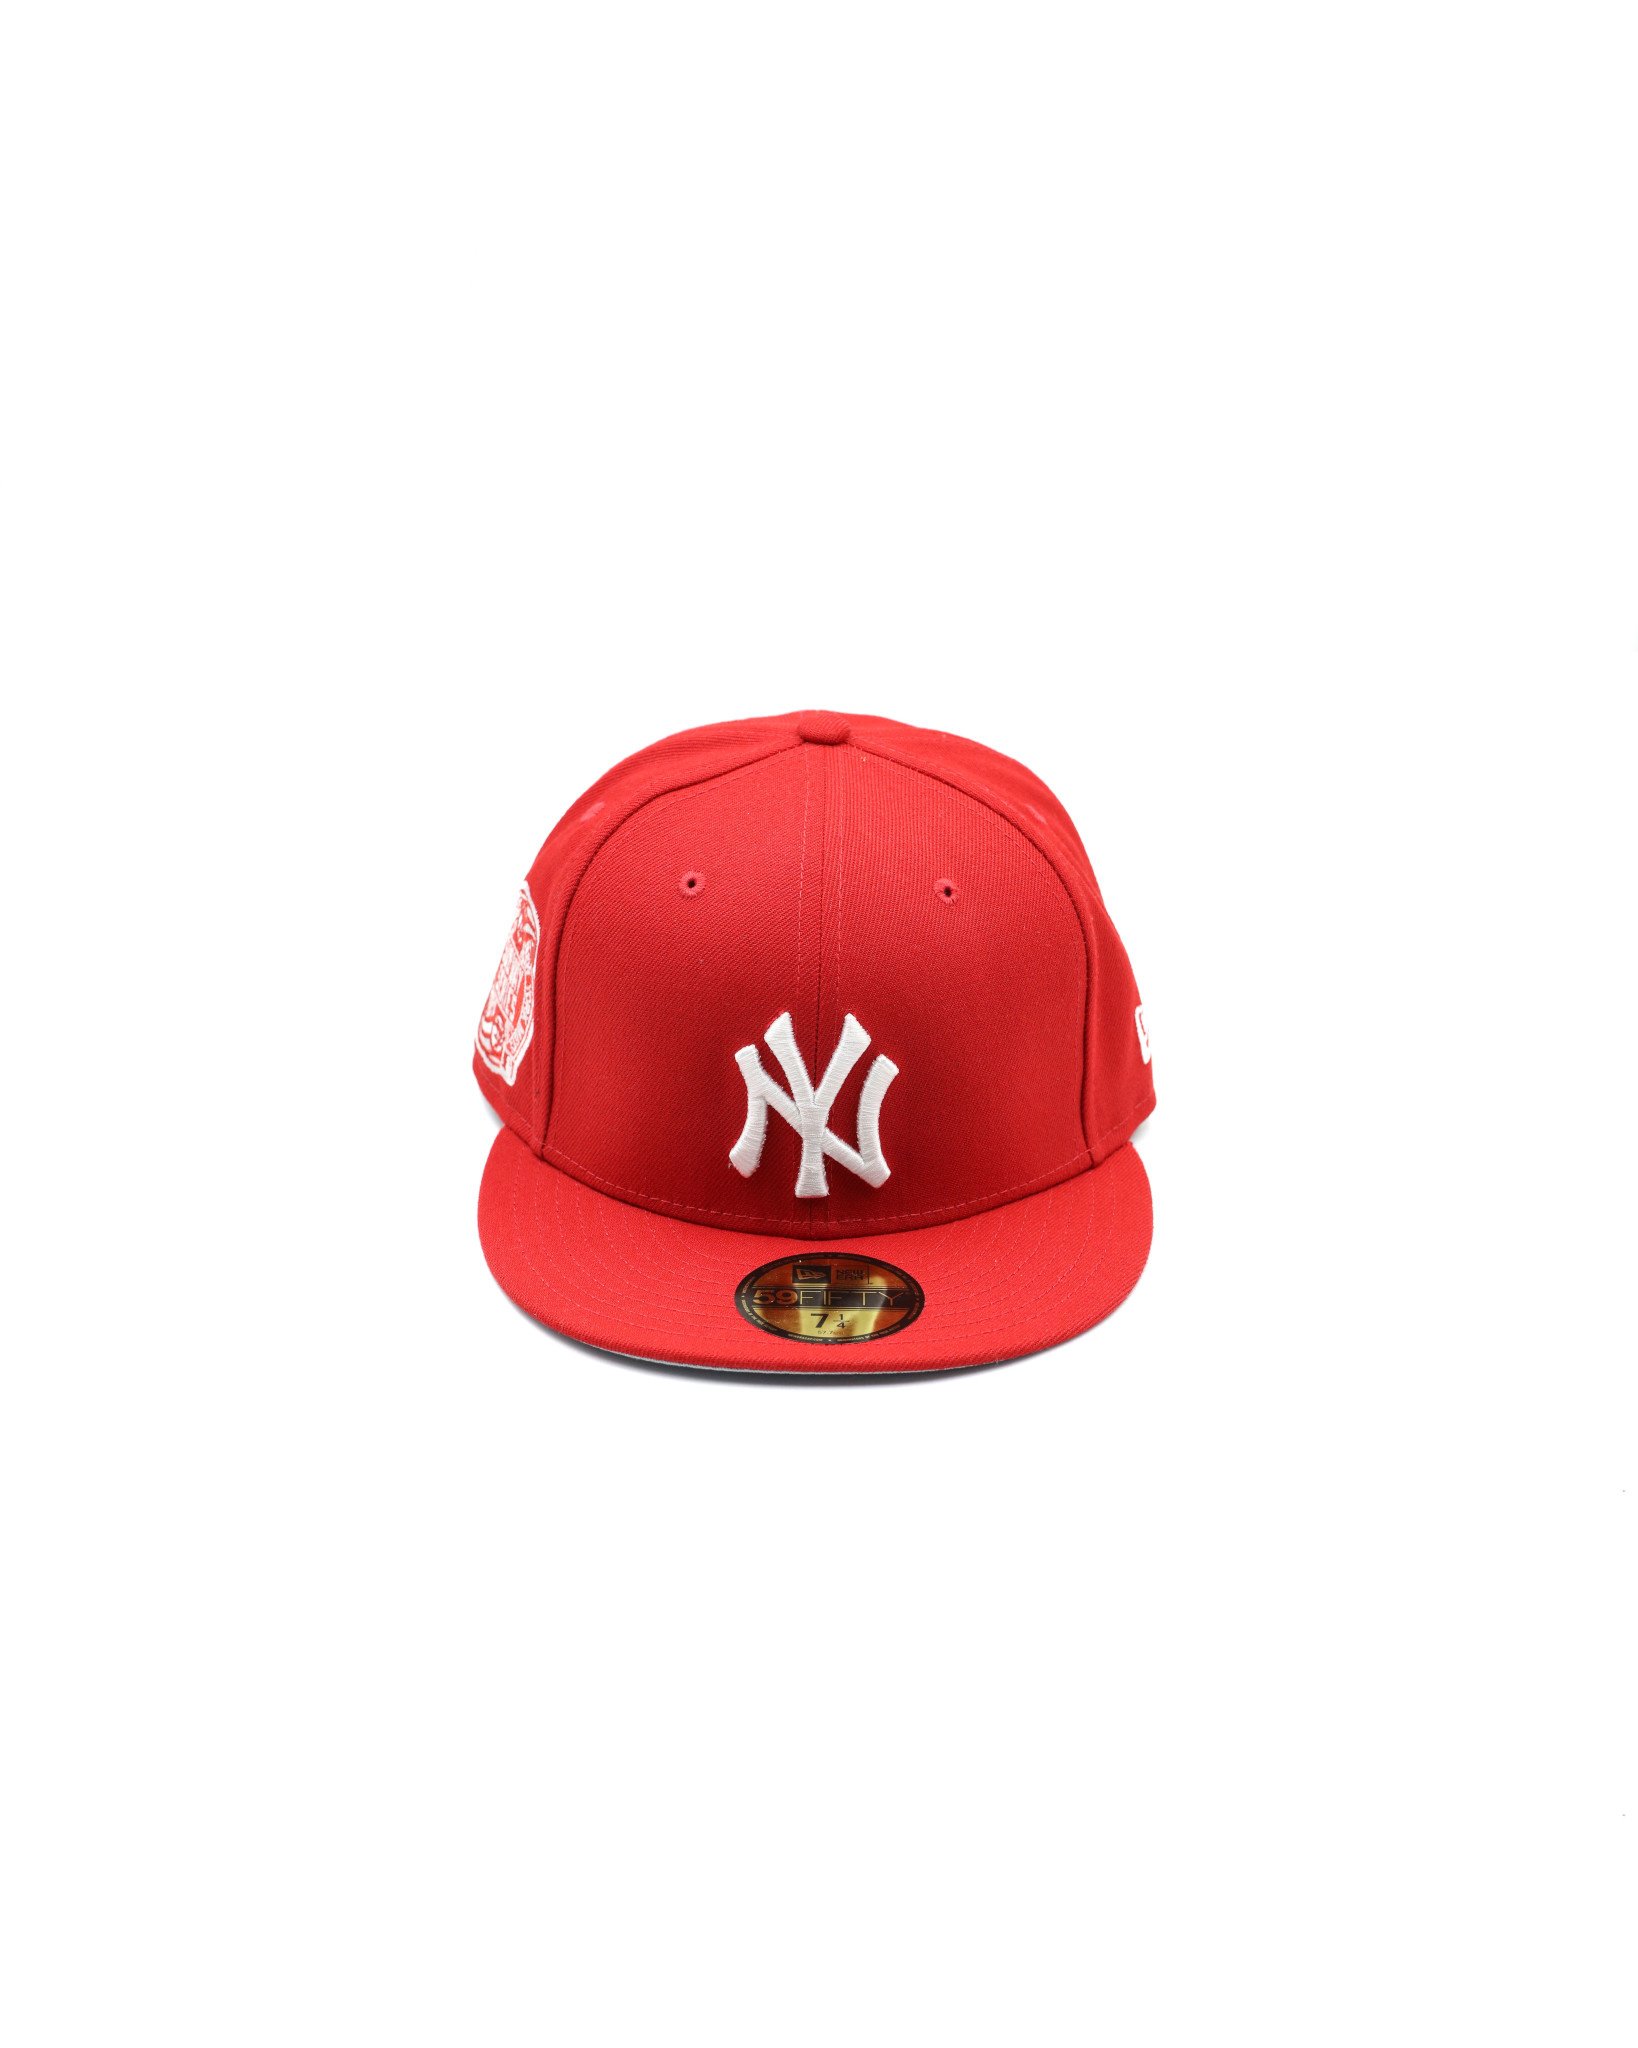 New Era Lids Exclusive New York Yankees Size 7 3/8 Hats Caps Red World  Series Baseball Side Patch NY